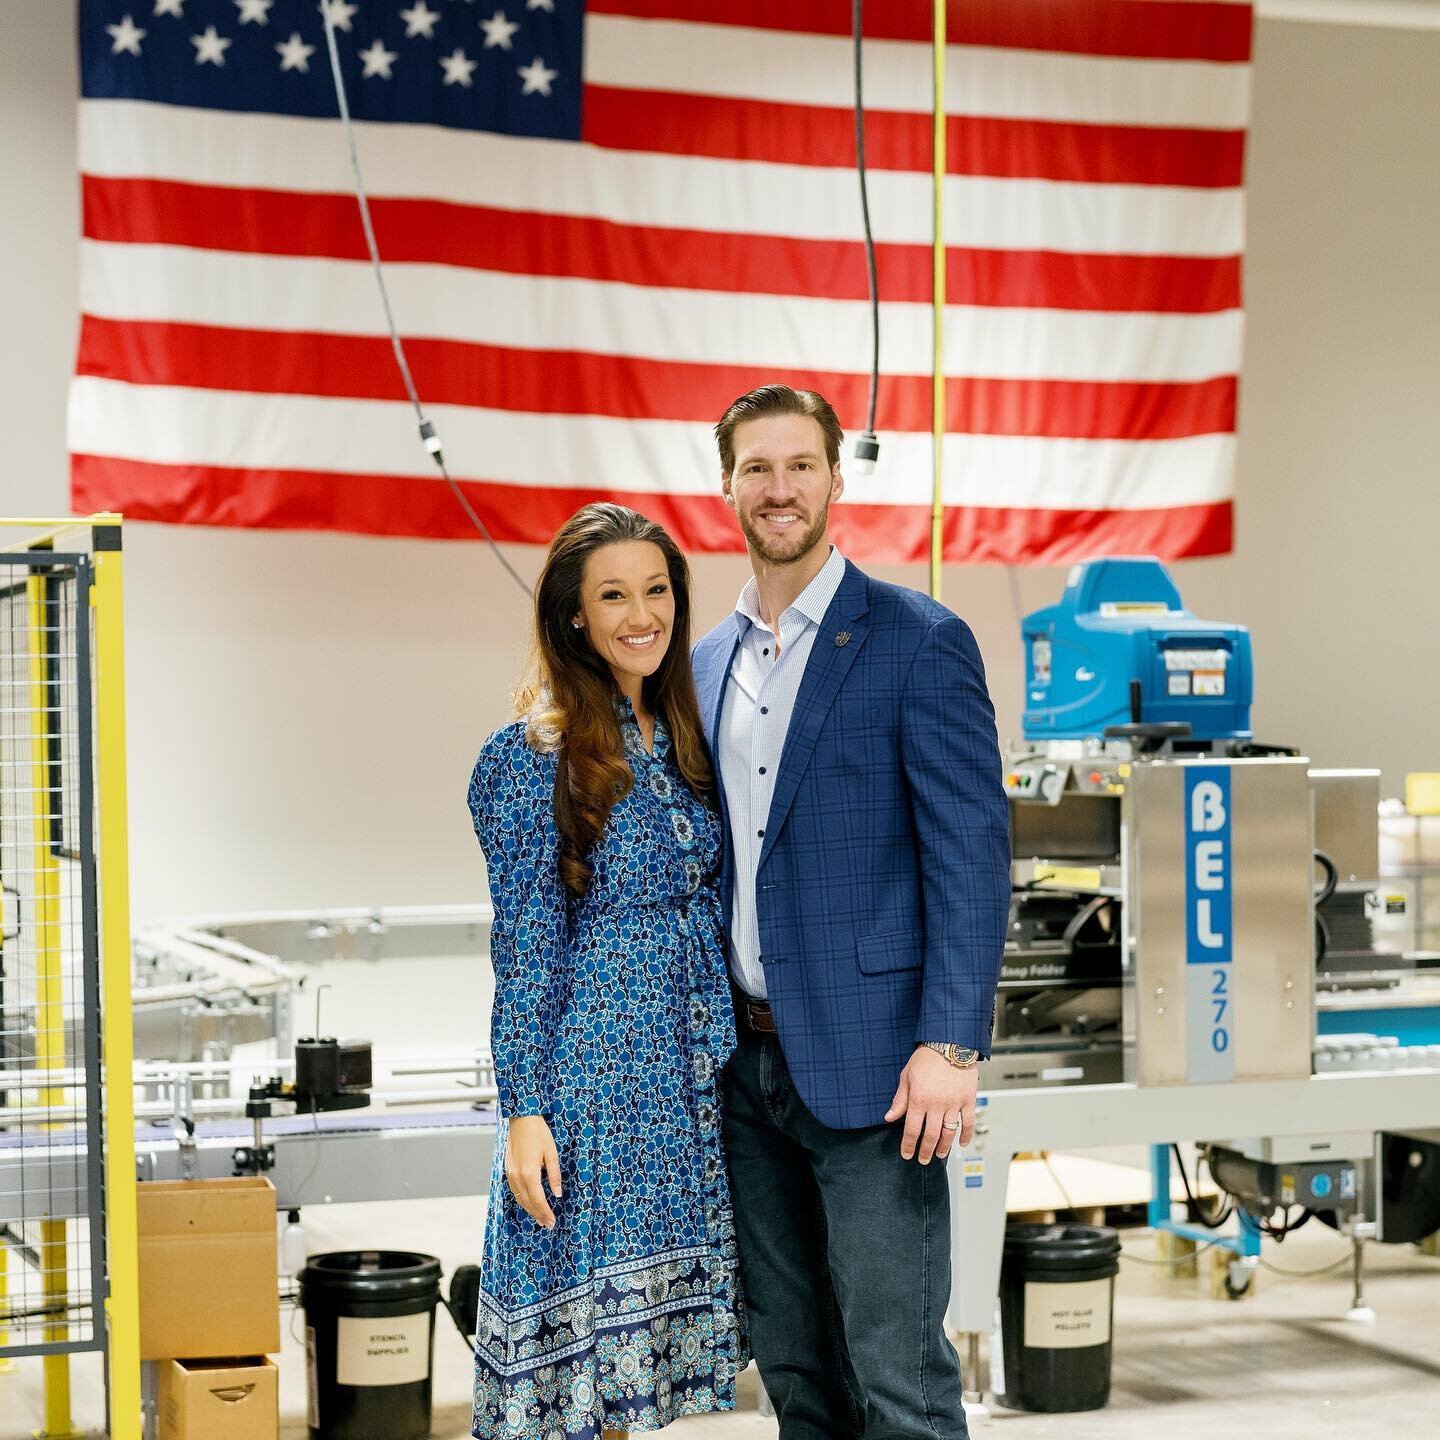 Pat Harrigan is a candidate for U.S. Congress in North Carolina.  Him and his wife Rocky are pictured here at their manufacturing facility. Photographing them through this massive facility was incredible. 

@patharrigannc